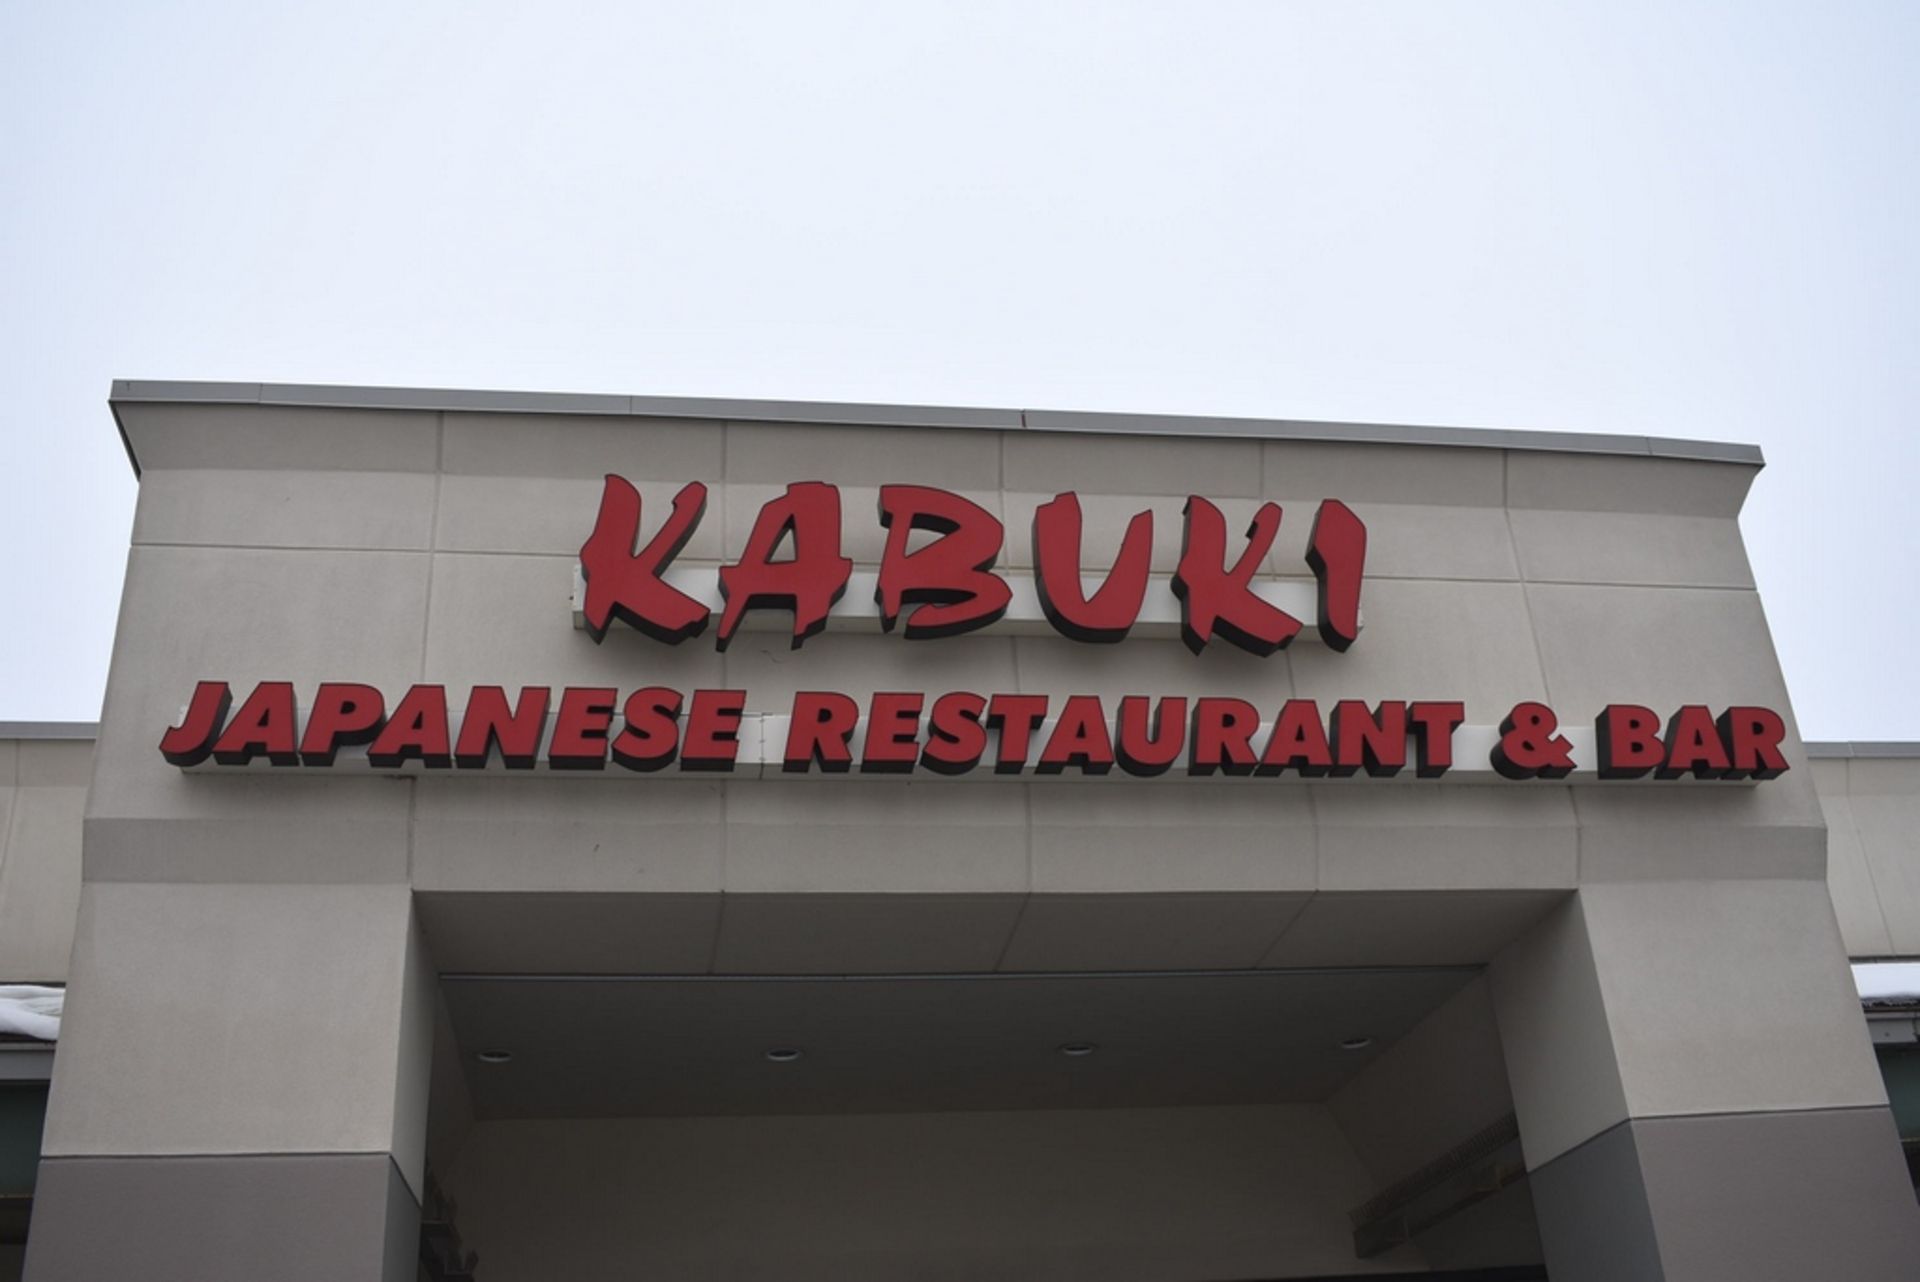 EXTERIOR SIGNAGE (2) LARGE EXTERIOR WALL MOUNTED COMMERCIAL "KABUKI" SIGNS